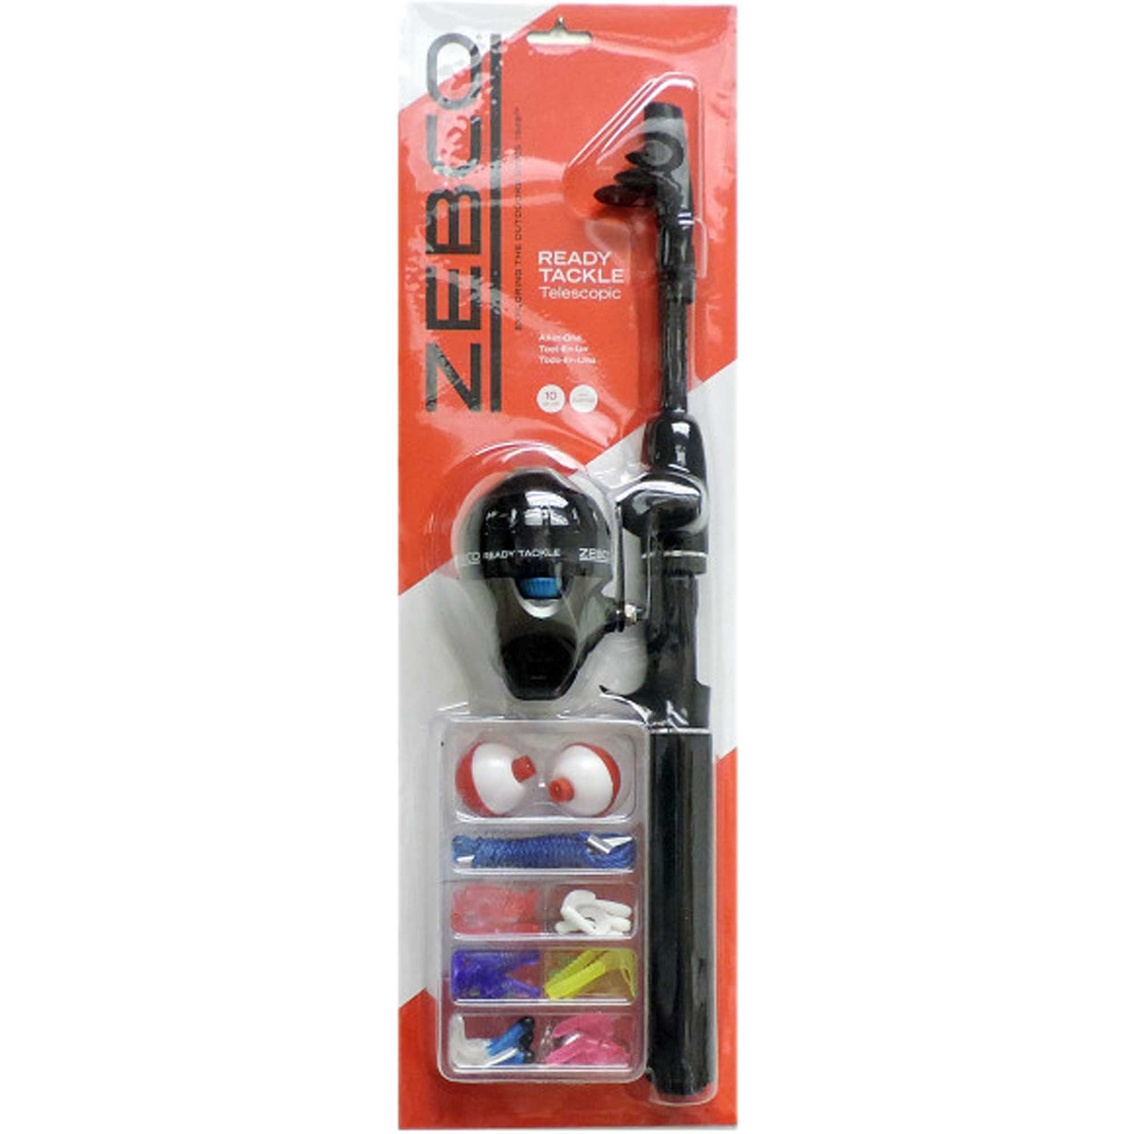 Zebco Ready Tackle Telescopic Fishing Rod, Reel and Tackle Wallet 3 pc. Set - Image 6 of 6